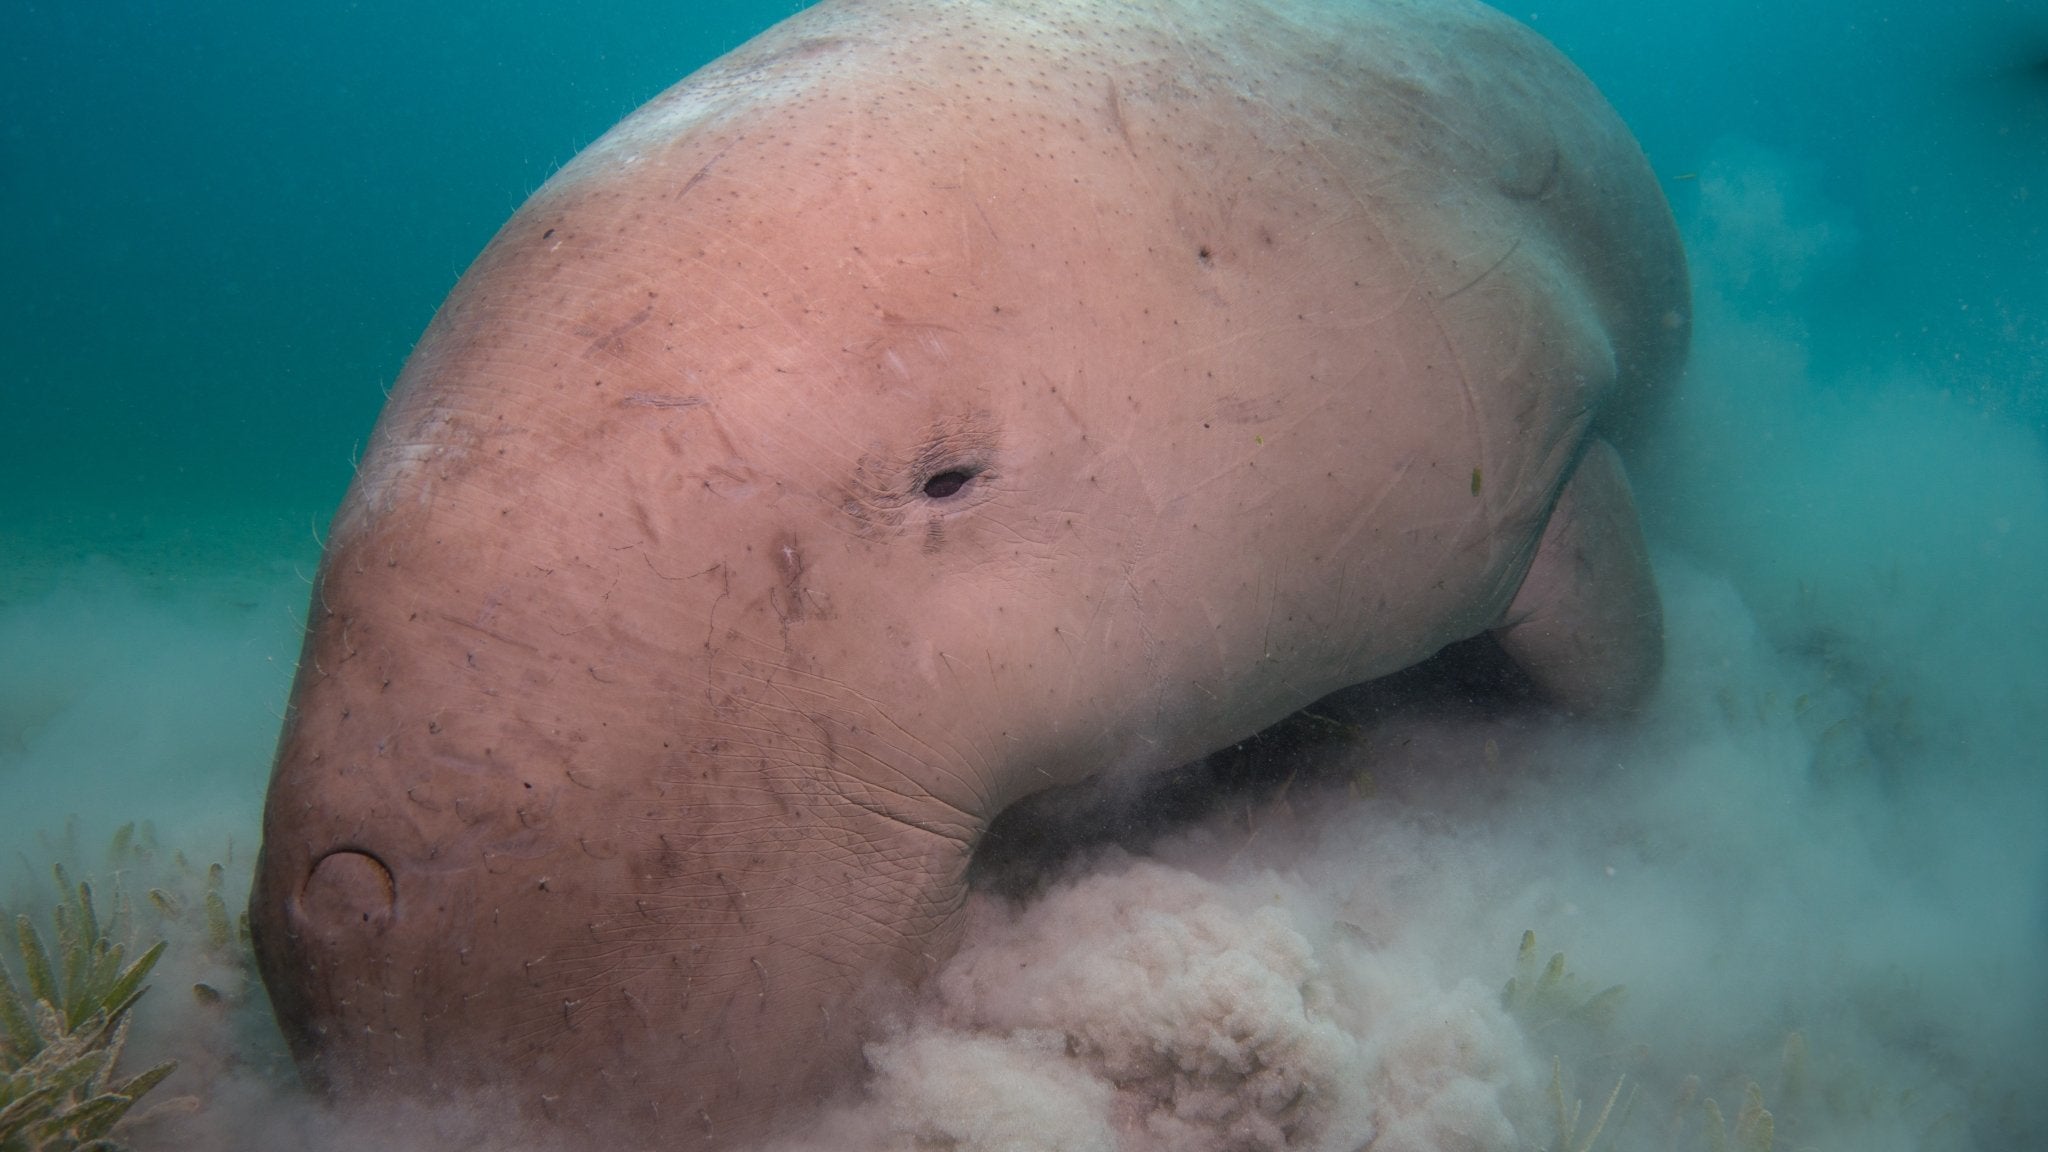 Image of a dugong swimming on the seafloor